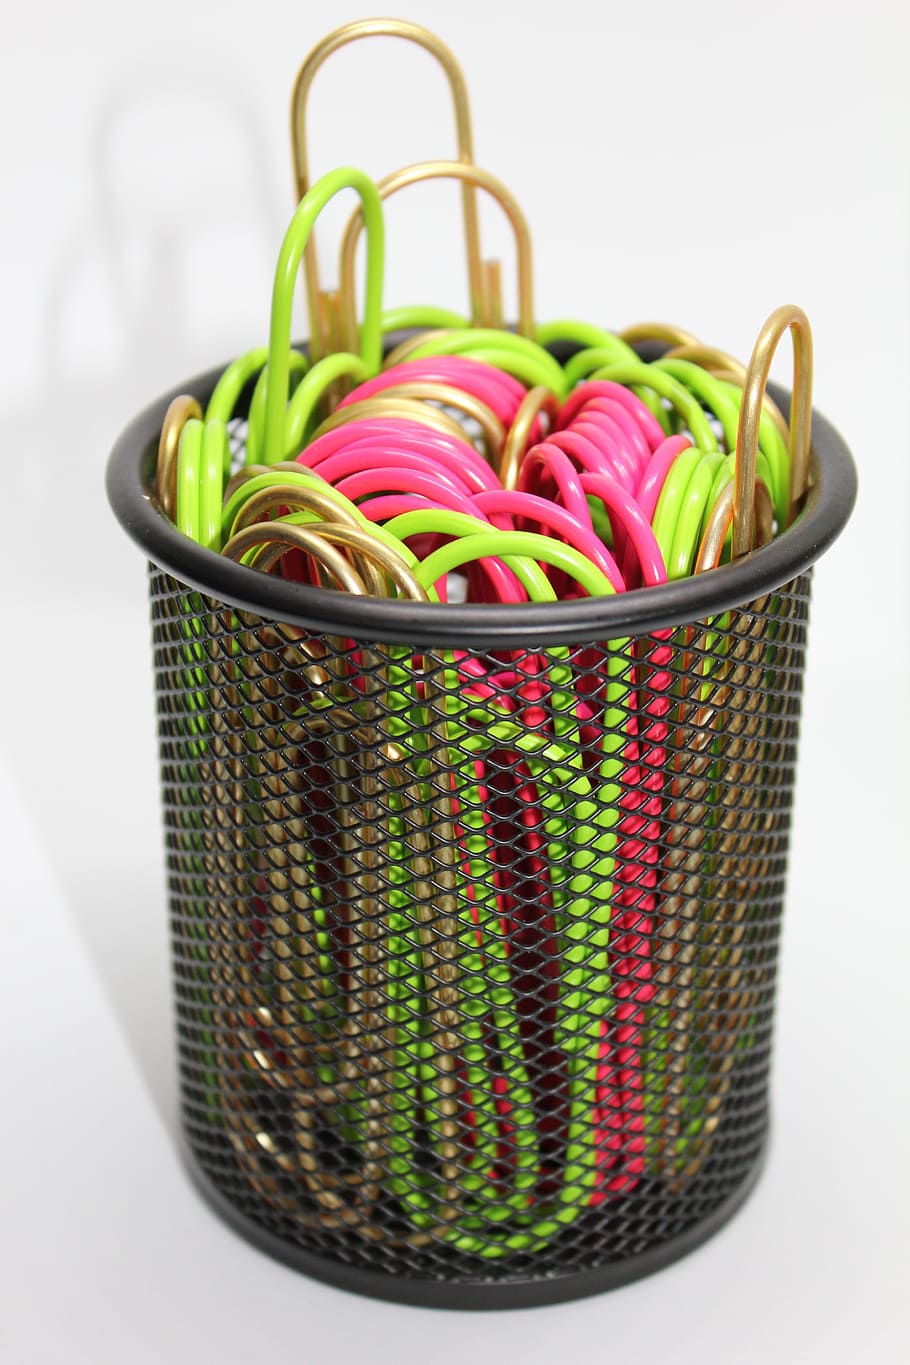 Paperclips, Office Supplies, Pen, Holder, pen holder, business, accessories, clip, office material, basket